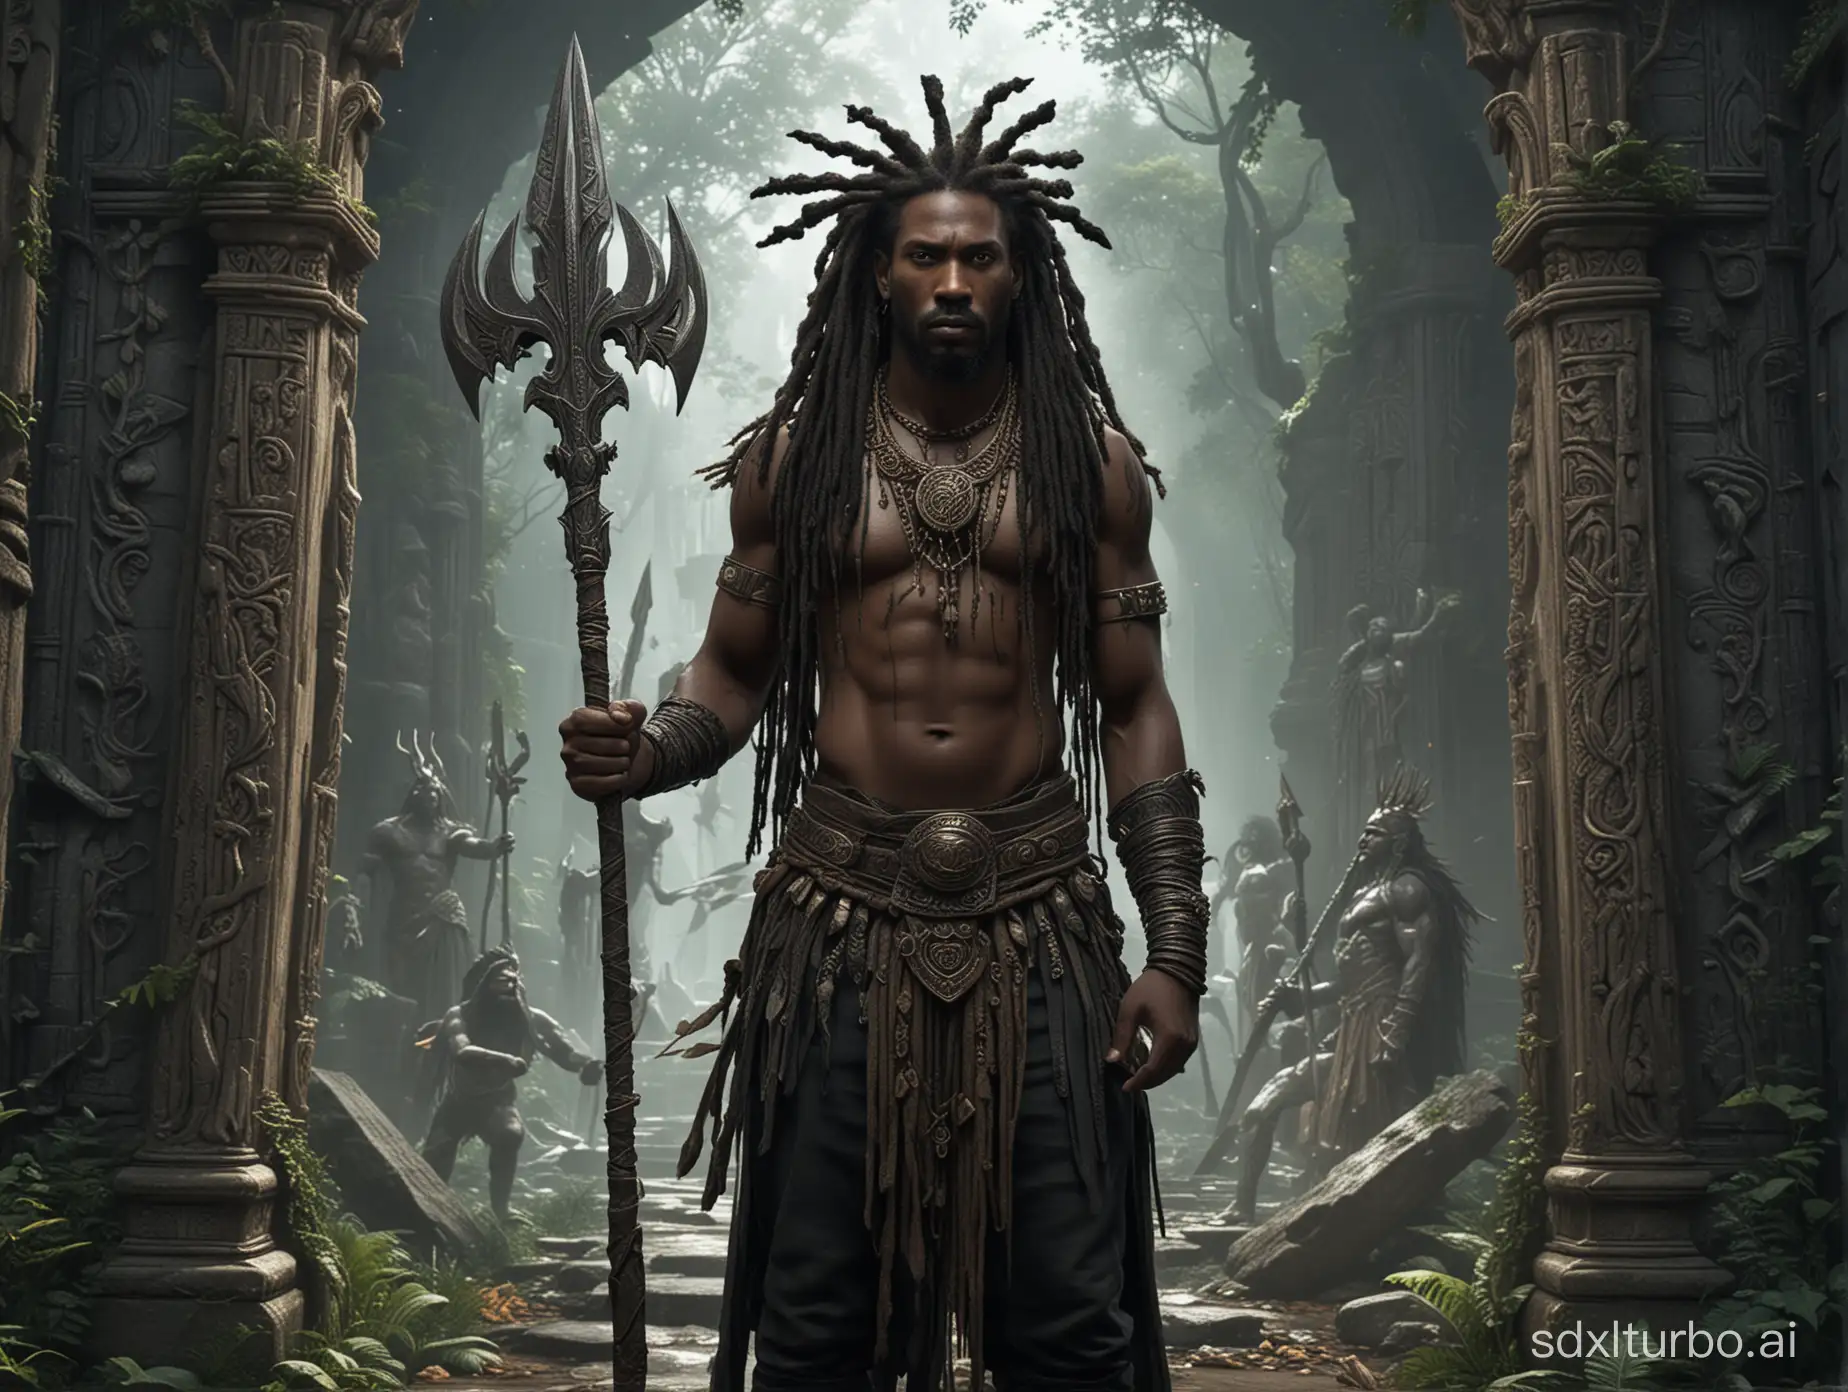 The high-resolution, detailed image shows a black man with dreadlocks, standing at the entrance to a mystical portal and holding a trident in his hand. He presents the imposing appearance of a warrior and is wearing a headdress and appears to be the main focus of the scene. In the background, there are several enchanted beings, giving more depth to the image.